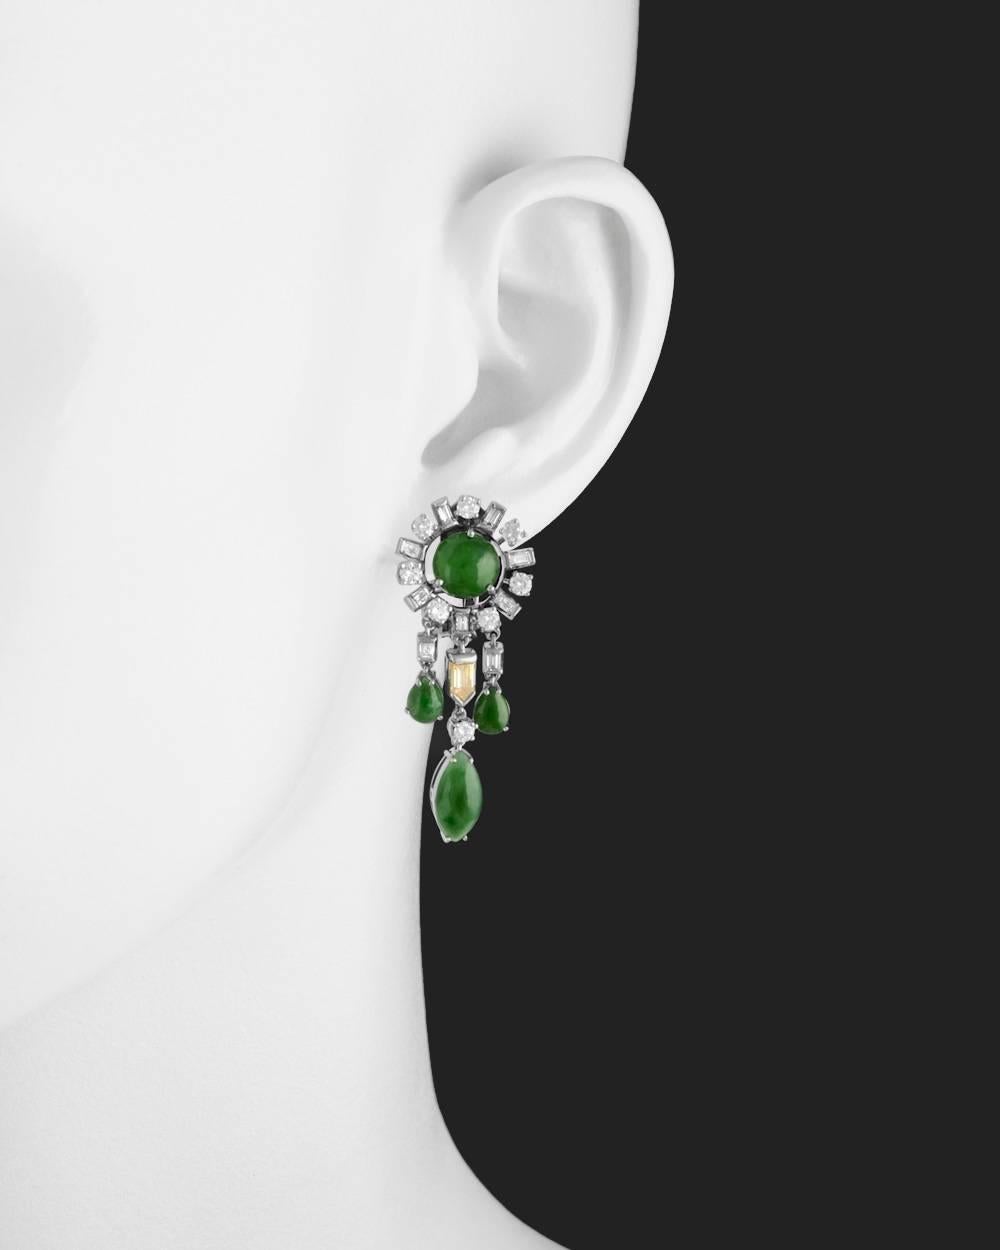 Chandelier-style earrings, designed with a cabochon-cut round jade surrounded by alternating baguette-cut and round-cut white diamonds at top suspending three multicolored diamond and cabochon-cut jade drops, the middle drop with a bullet-cut fancy